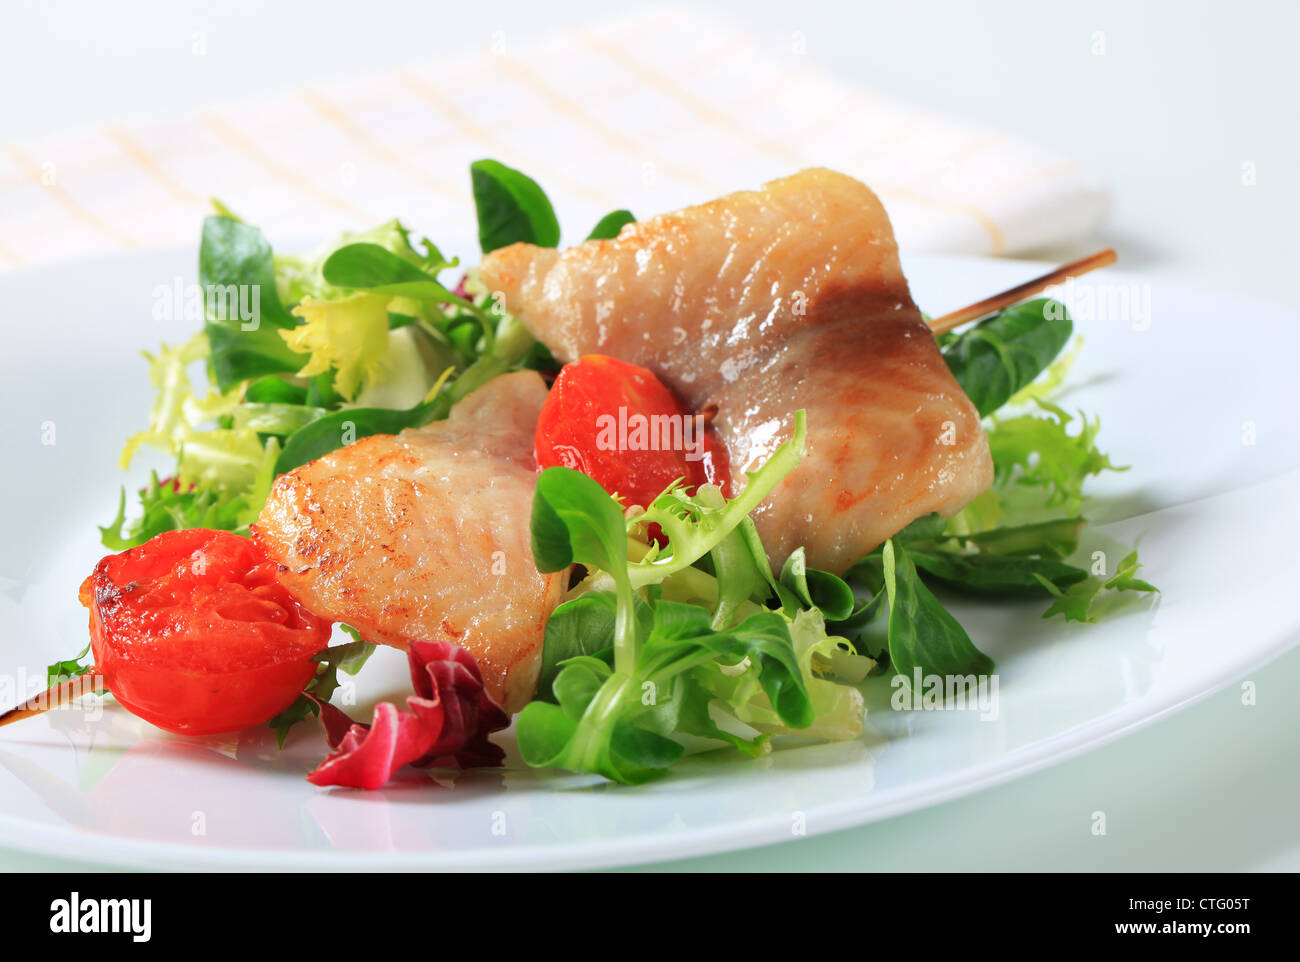 Fish skewer on a nest of salad greens Stock Photo